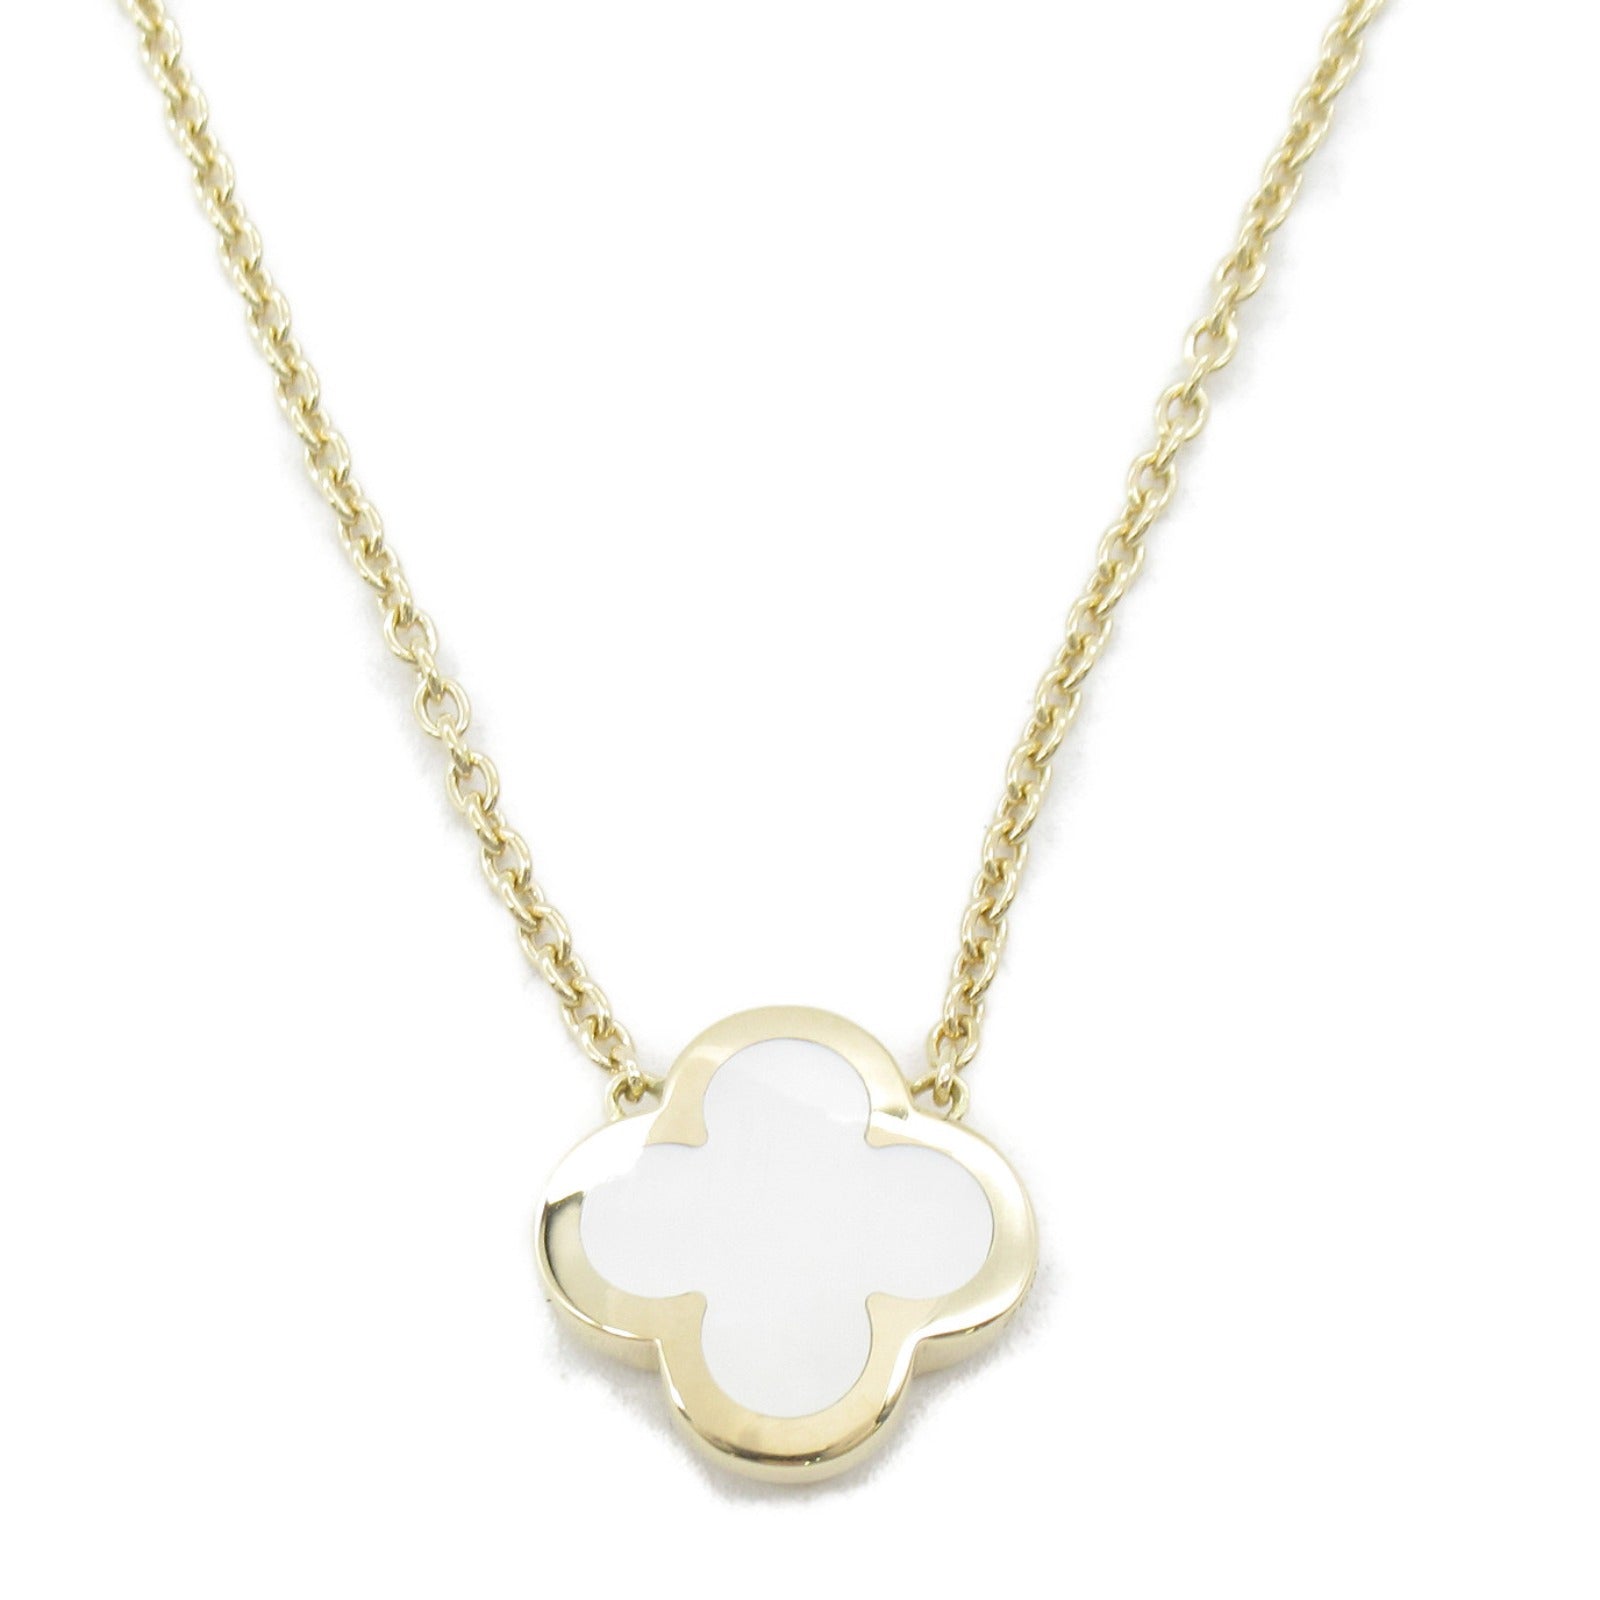 Van Cleef & Arpels Van Cleef & Arpels Alhambra White S Pendant Necklace Jewelry K18 (yellow g) White Shell  White Shell